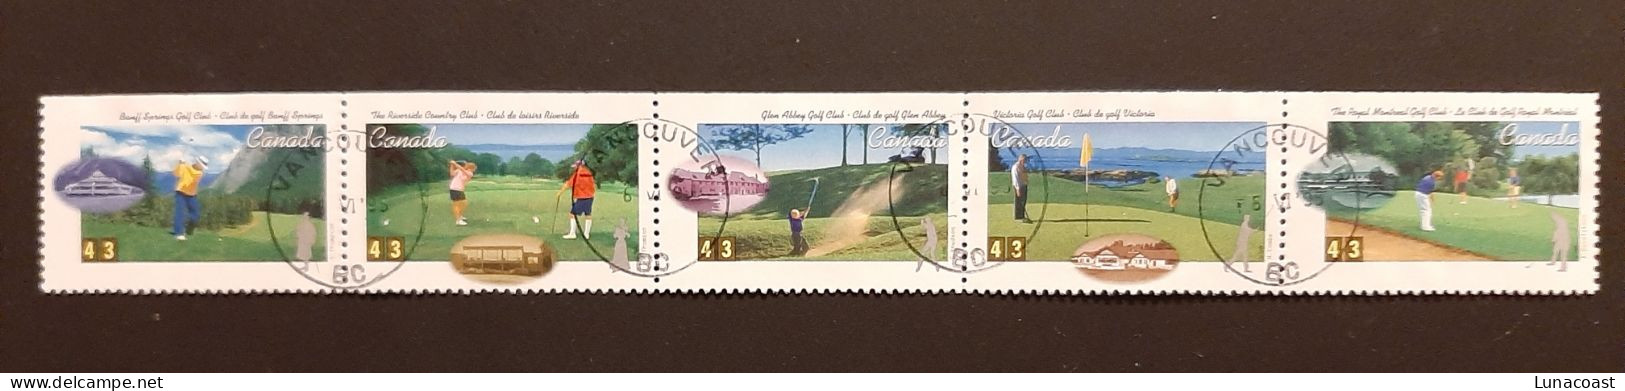 Canada 1995  USED  Sc1557a   Hor. Strip Of 5 X 43c, Golf In Canada - Usados